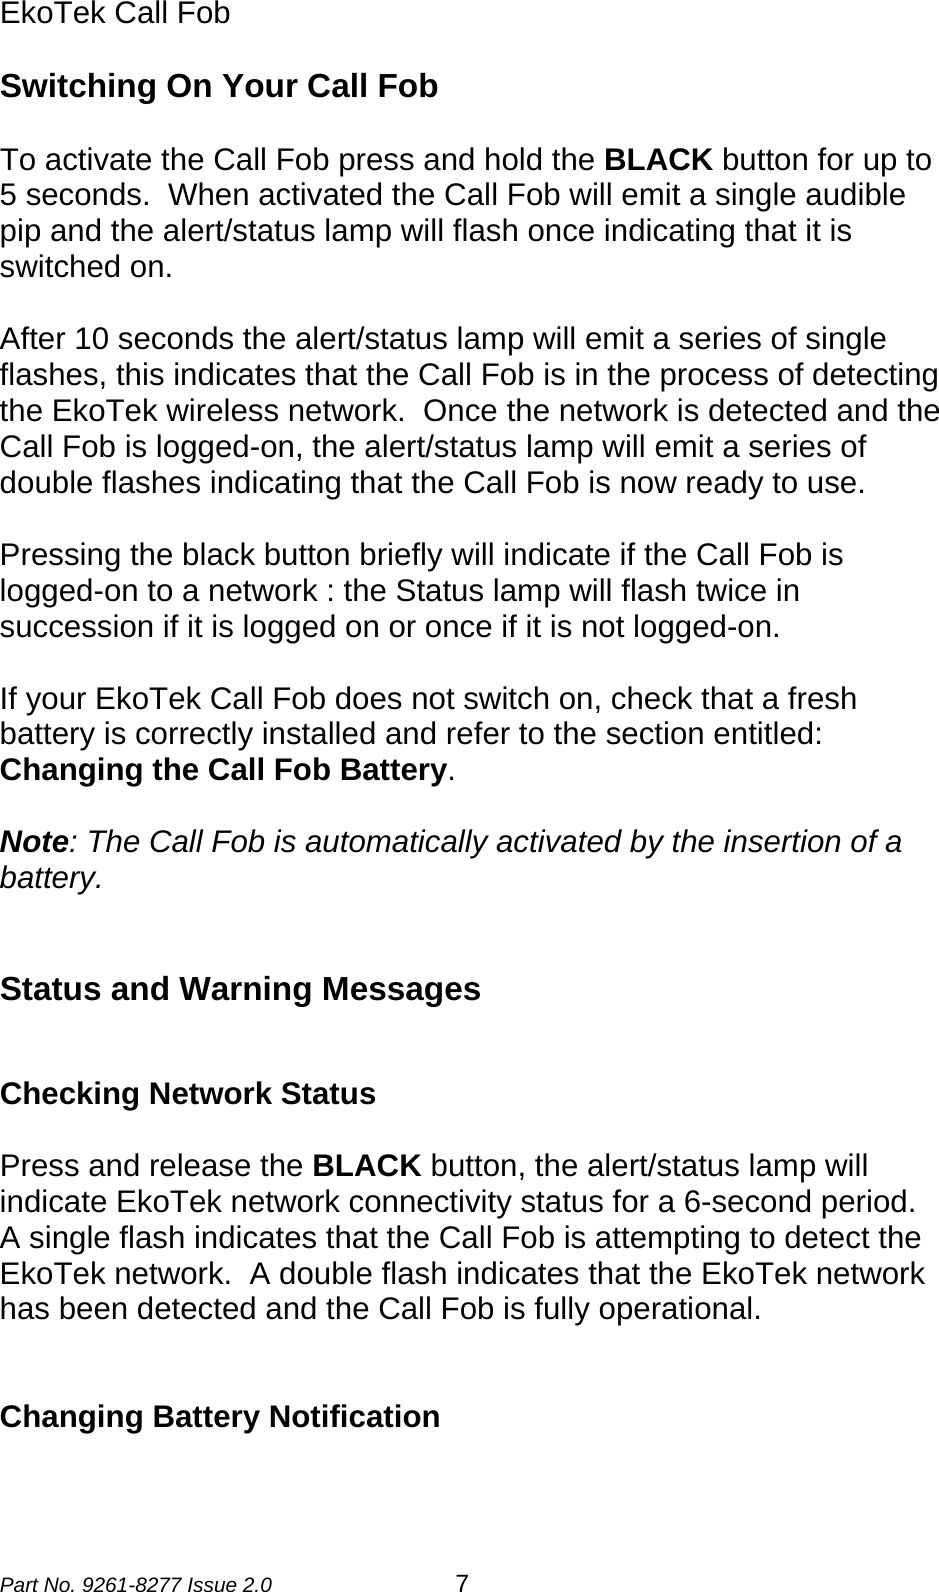 EkoTek Call Fob  Switching On Your Call Fob  To activate the Call Fob press and hold the BLACK button for up to 5 seconds.  When activated the Call Fob will emit a single audible pip and the alert/status lamp will flash once indicating that it is switched on.  After 10 seconds the alert/status lamp will emit a series of single flashes, this indicates that the Call Fob is in the process of detecting the EkoTek wireless network.  Once the network is detected and the Call Fob is logged-on, the alert/status lamp will emit a series of double flashes indicating that the Call Fob is now ready to use.  Pressing the black button briefly will indicate if the Call Fob is logged-on to a network : the Status lamp will flash twice in succession if it is logged on or once if it is not logged-on.  If your EkoTek Call Fob does not switch on, check that a fresh battery is correctly installed and refer to the section entitled: Changing the Call Fob Battery.  Note: The Call Fob is automatically activated by the insertion of a battery.   Status and Warning Messages   Checking Network Status  Press and release the BLACK button, the alert/status lamp will indicate EkoTek network connectivity status for a 6-second period.  A single flash indicates that the Call Fob is attempting to detect the EkoTek network.  A double flash indicates that the EkoTek network has been detected and the Call Fob is fully operational.   Changing Battery Notification  Part No. 9261-8277 Issue 2.0  7 